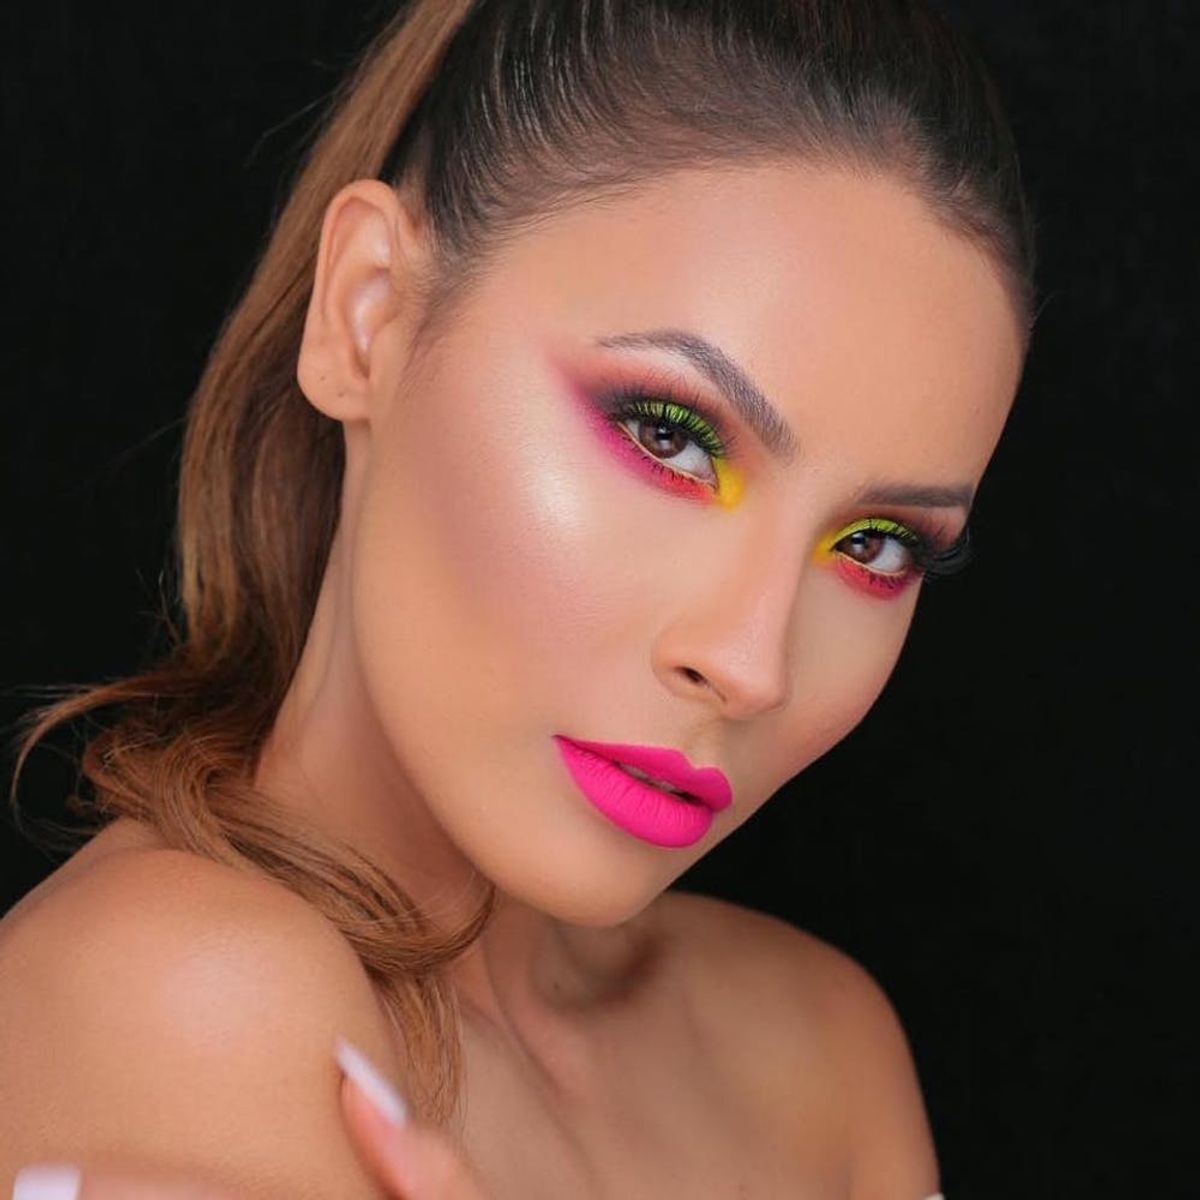 13 Makeup YouTube Tutorials to Master Before Your Next Festival